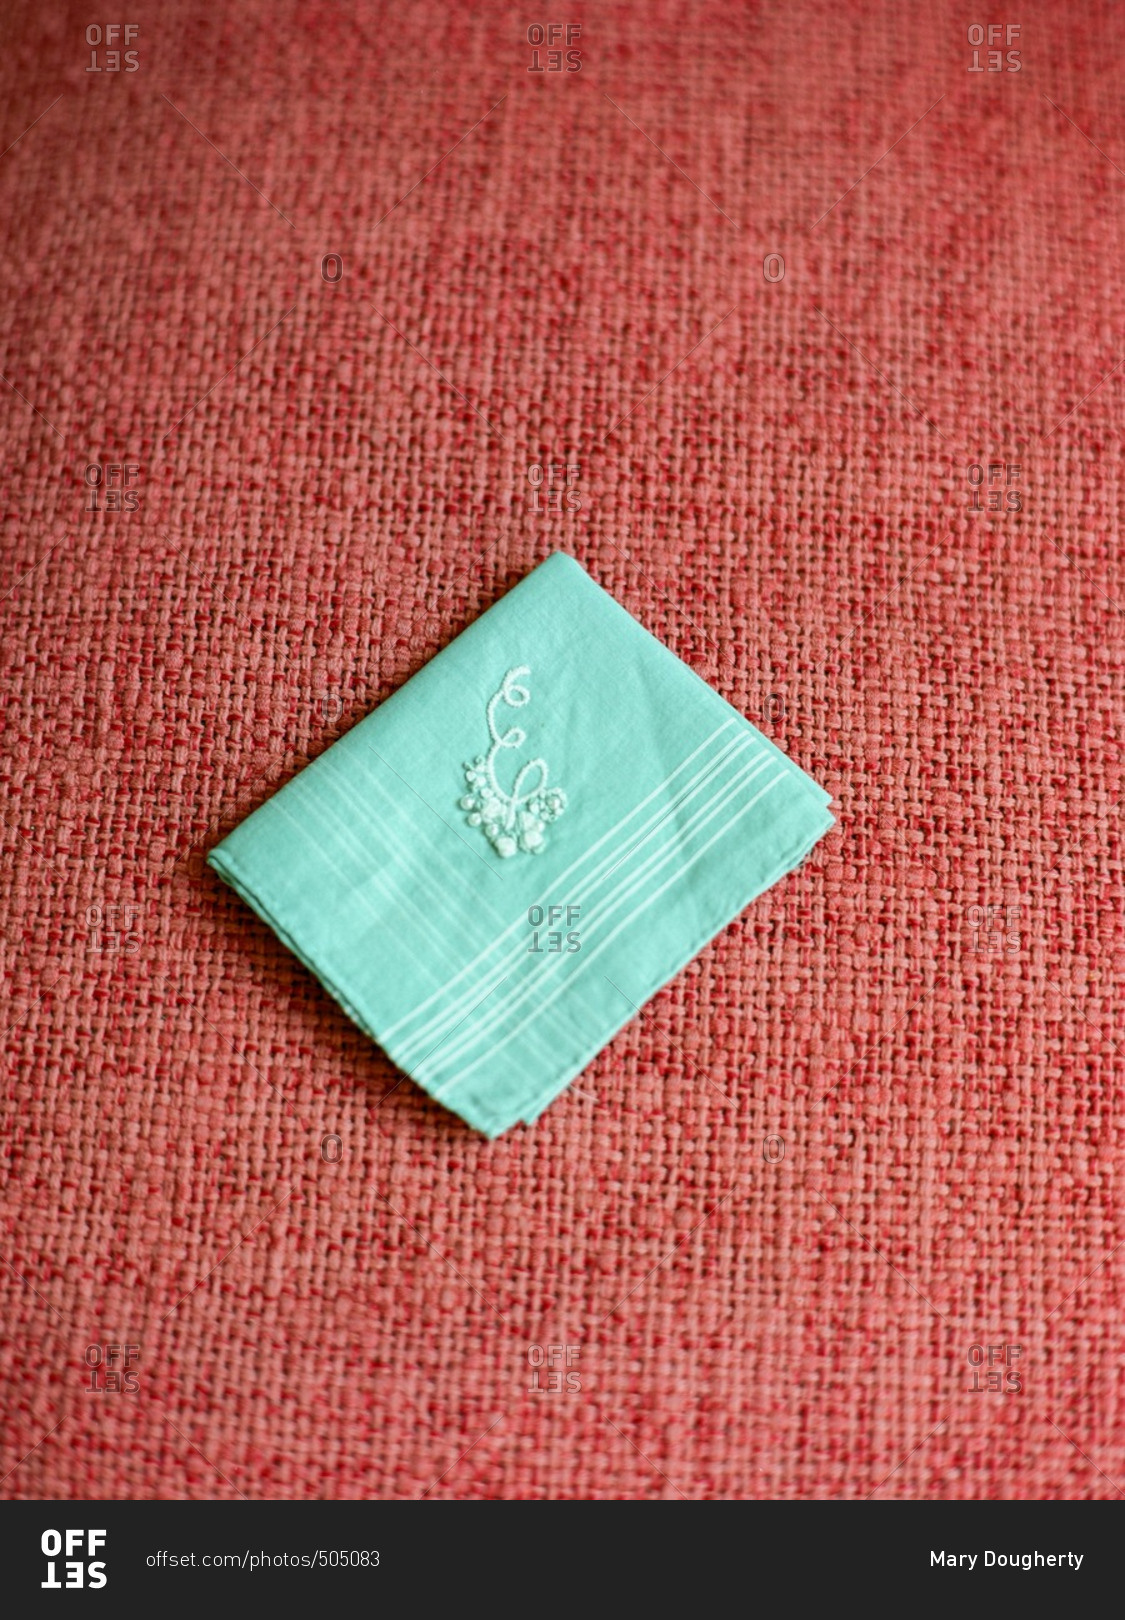 Light blue handkerchief with white embroidery